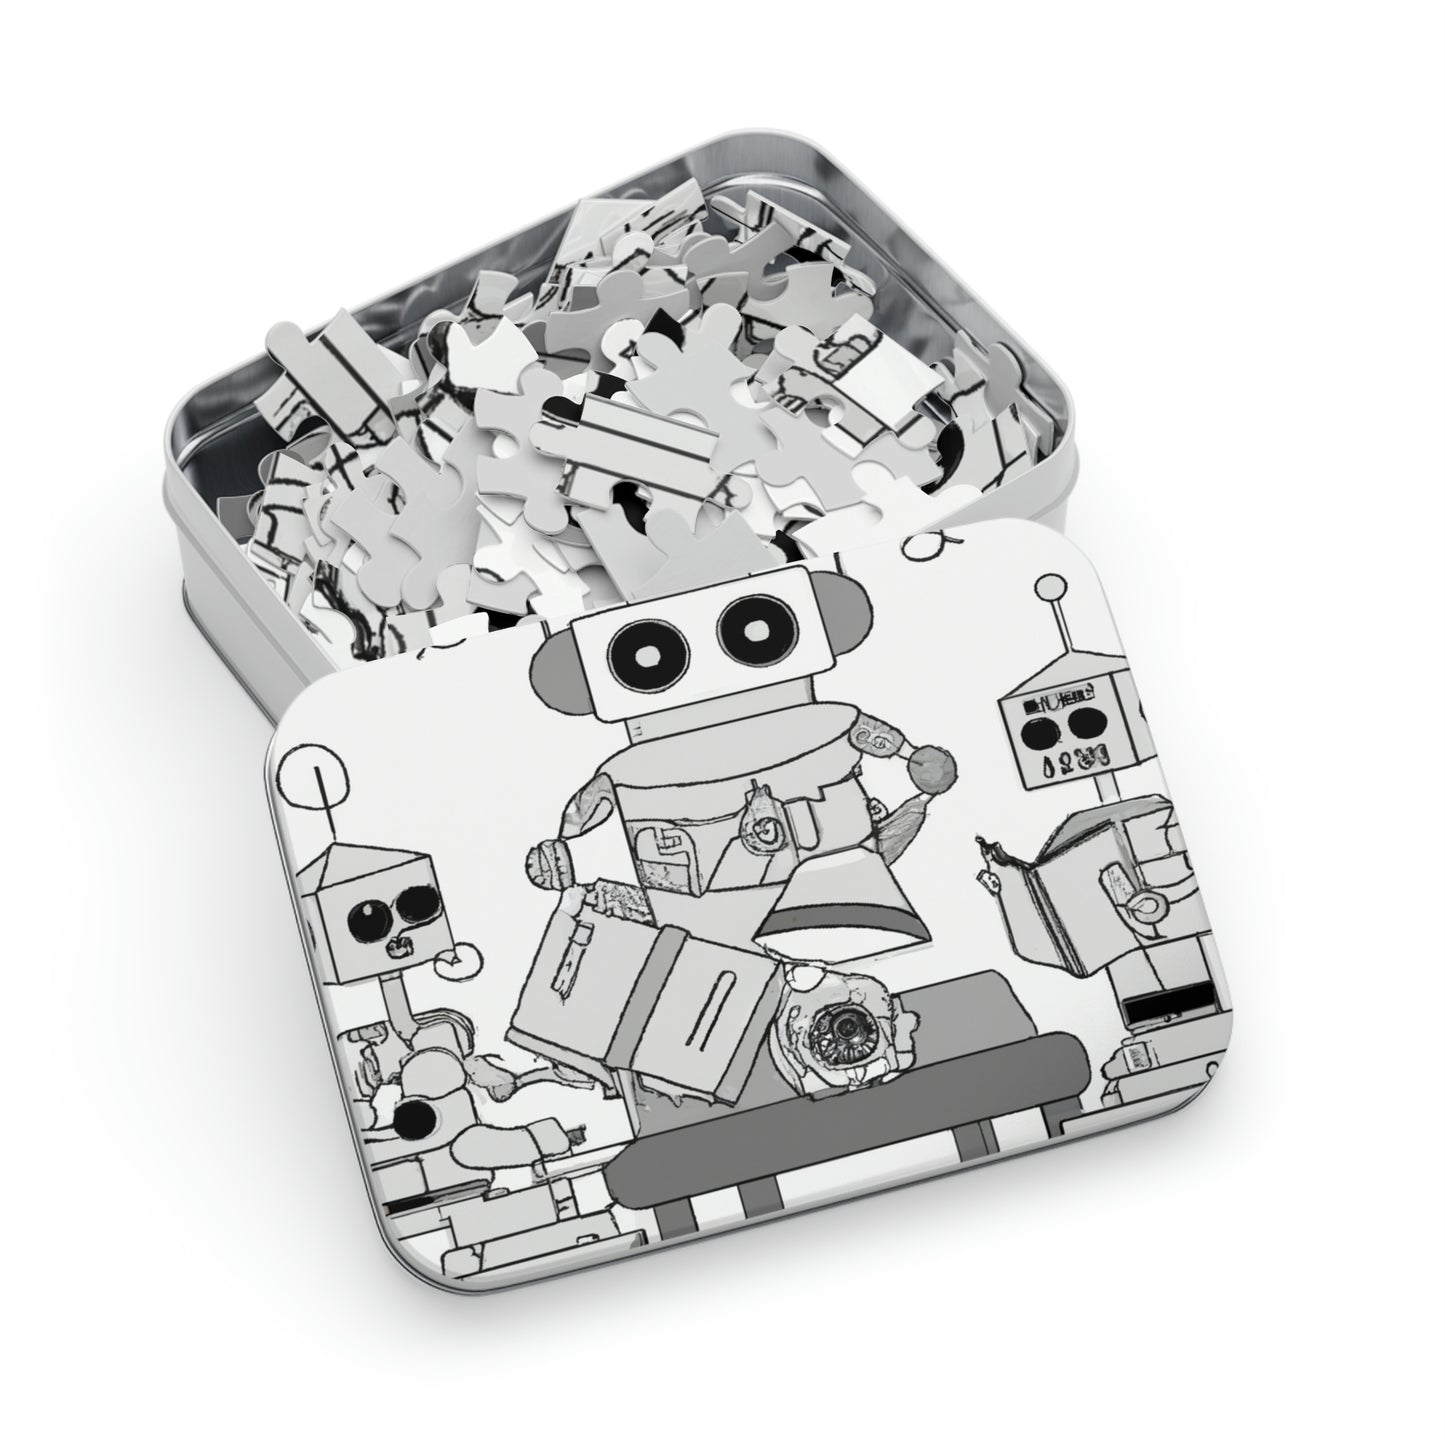 "Robot Search for Power" - The Alien Jigsaw Puzzle